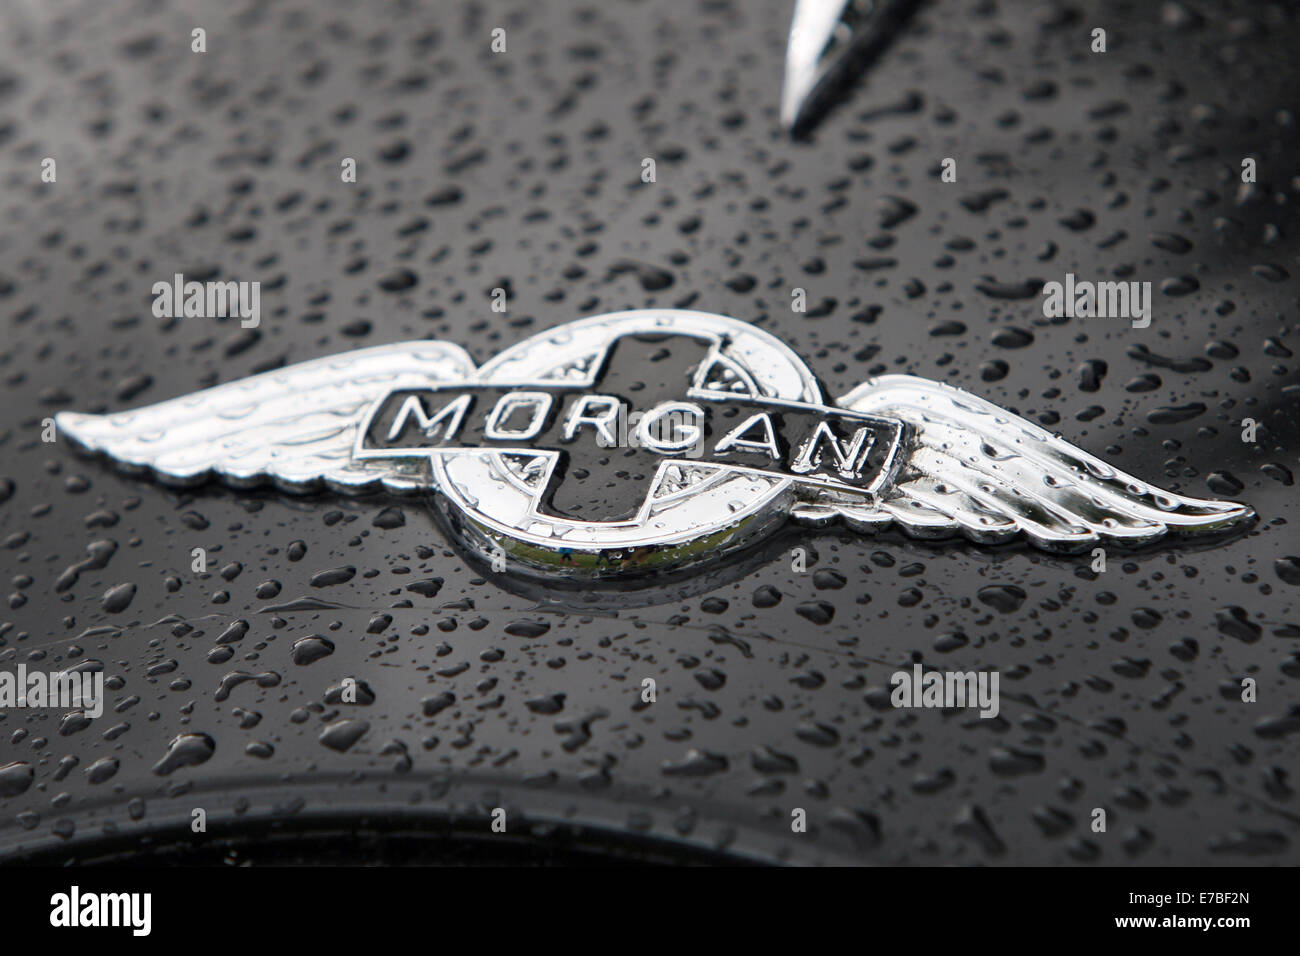 A Morgan car badge in the rain. The  low volume sports car manufacturer is based in Malvern, England. Stock Photo